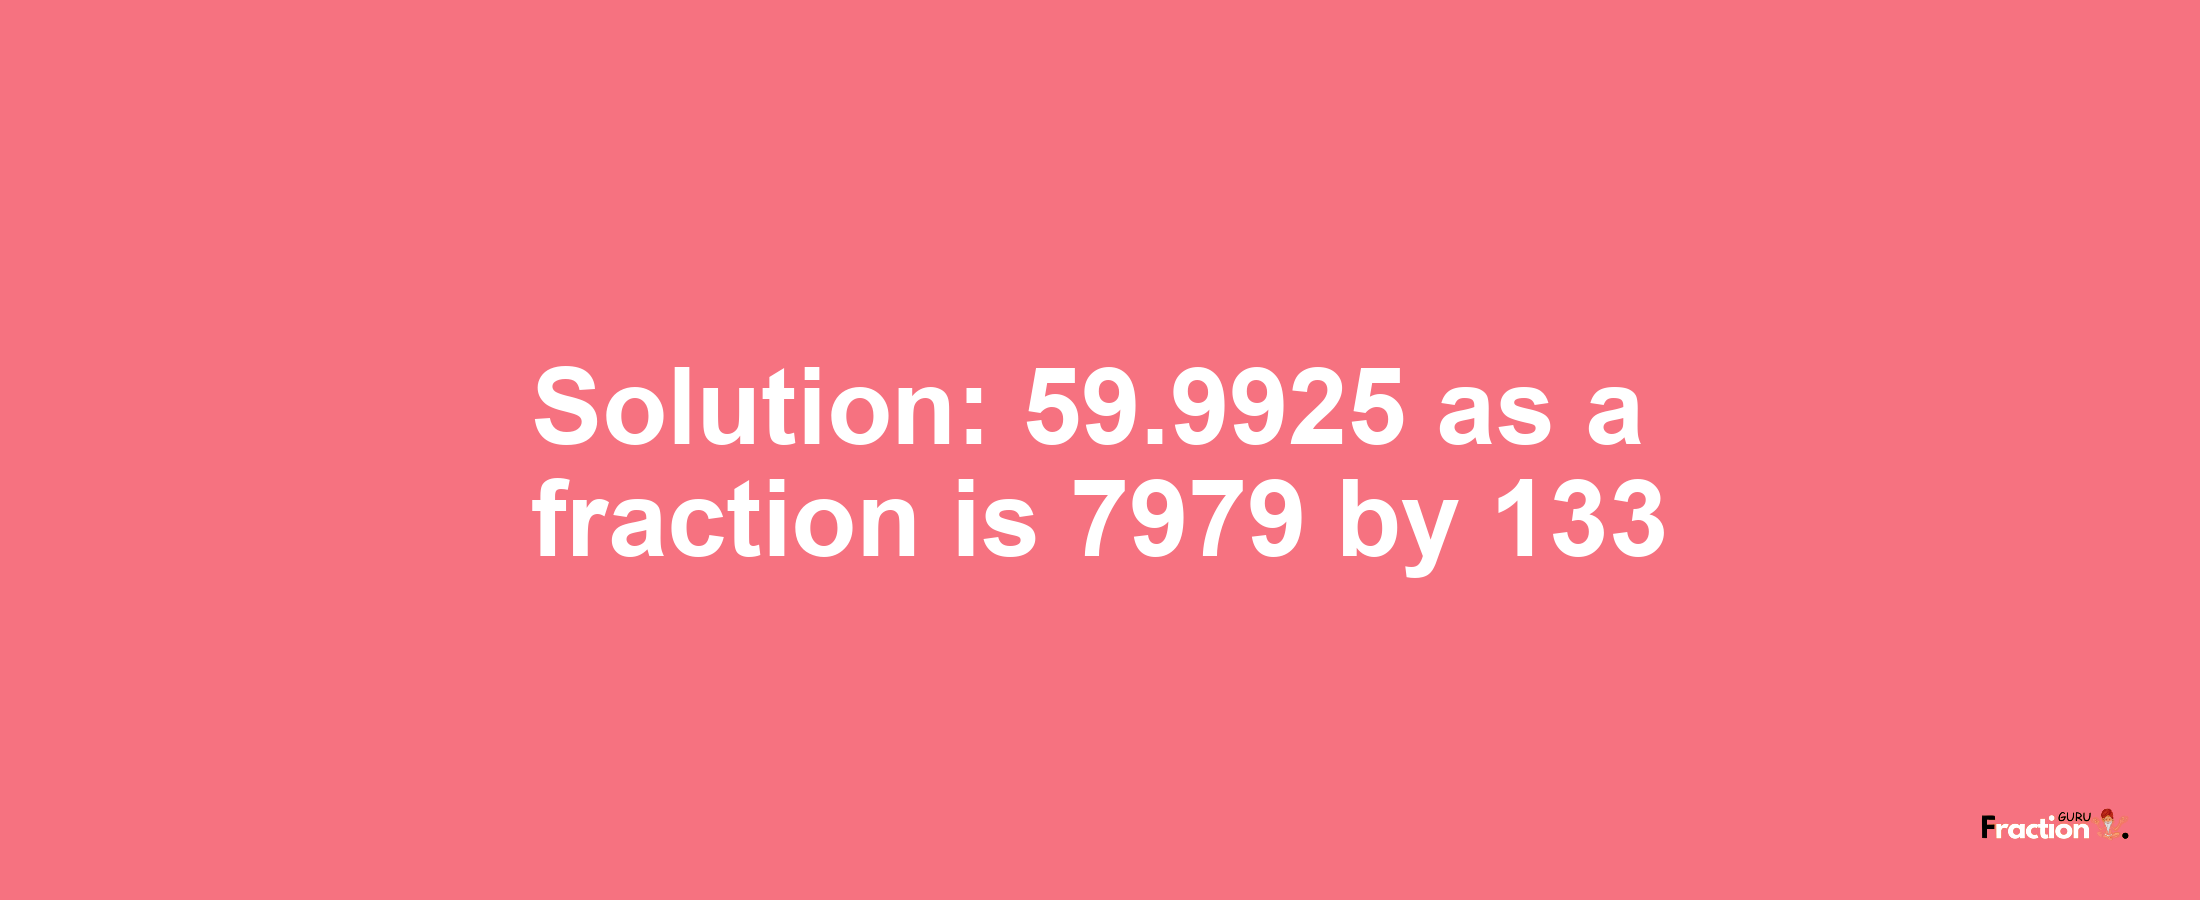 Solution:59.9925 as a fraction is 7979/133